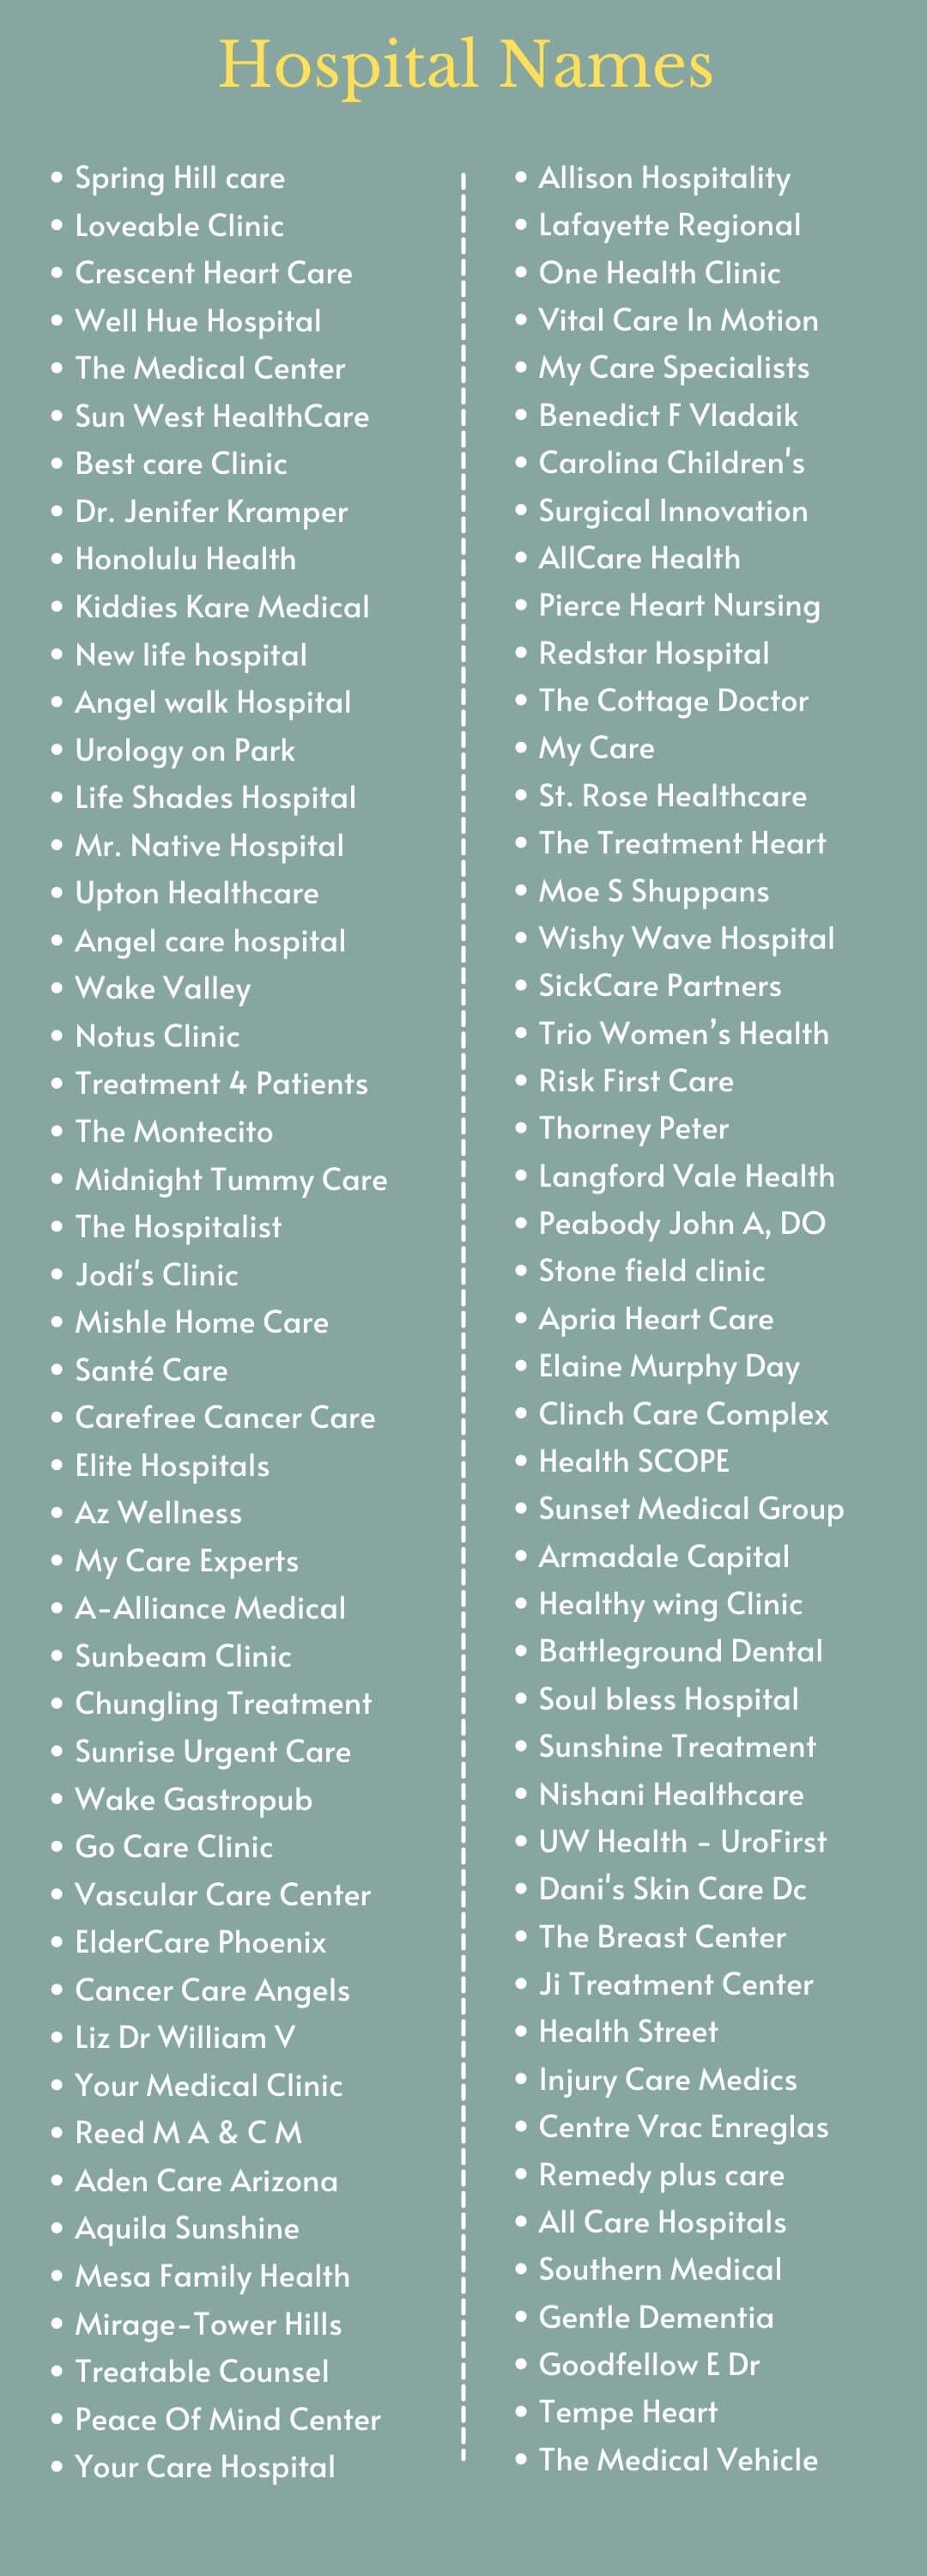 Hospital Names: infographic